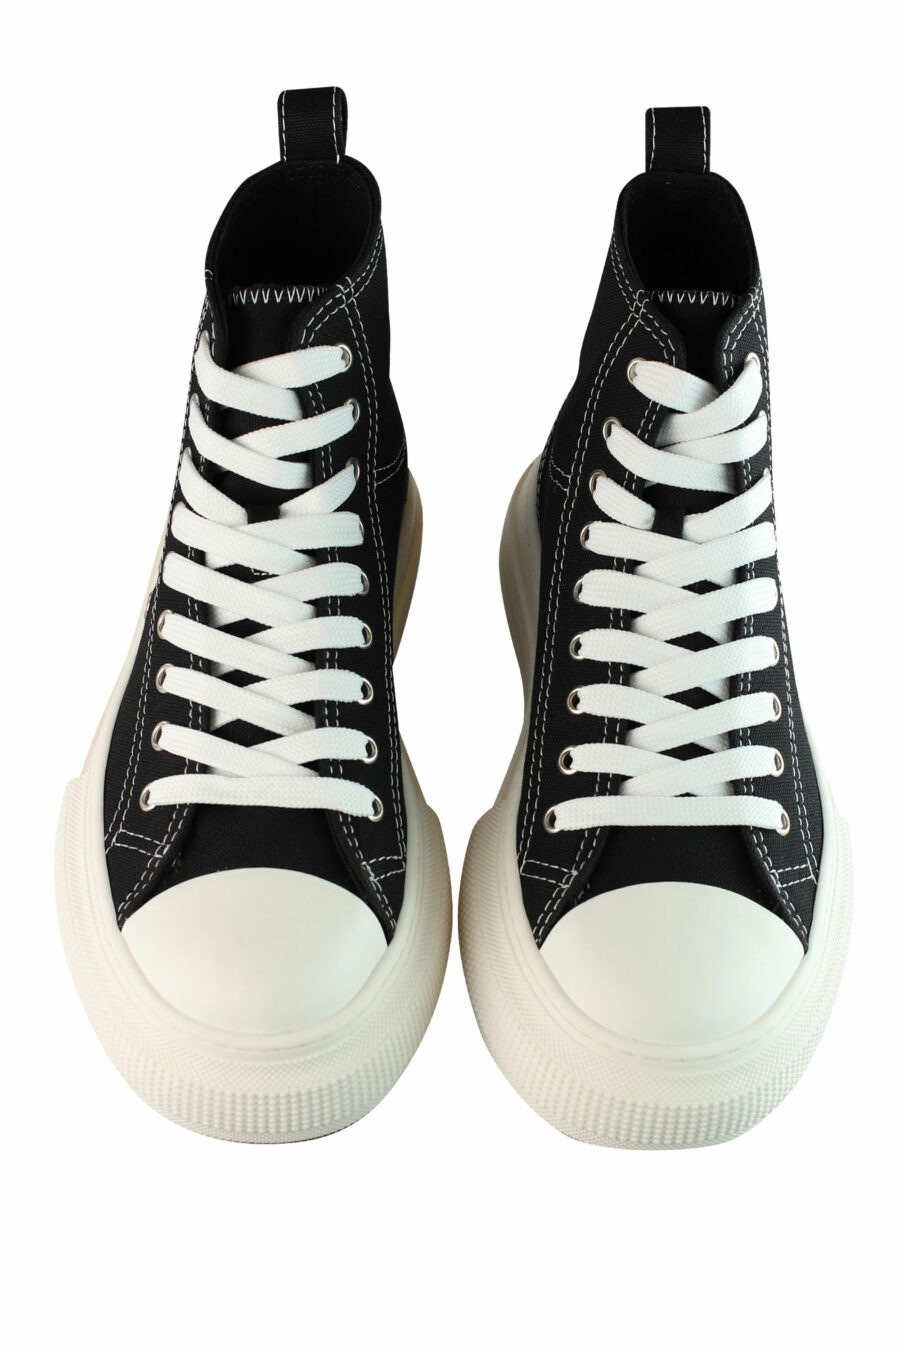 Black bootie style trainers with platform and mini logo - IMG 1371